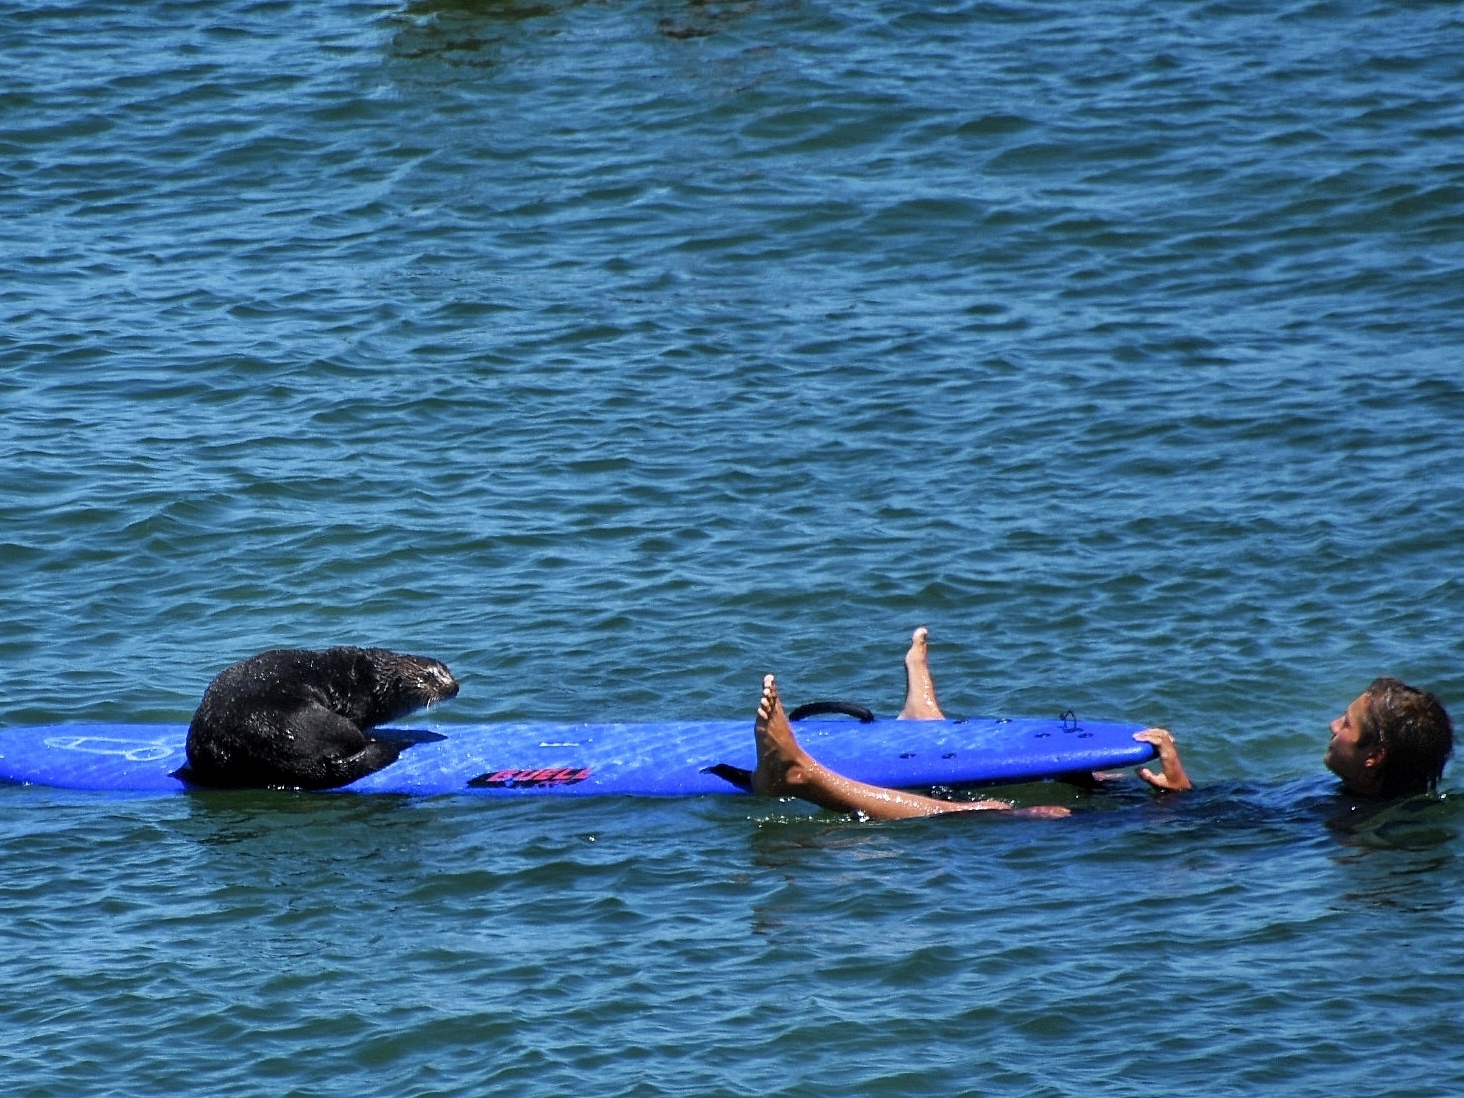 a large sea otter sits at one end of a blue surfboard while a surfer lays under the board with their feet up on either side